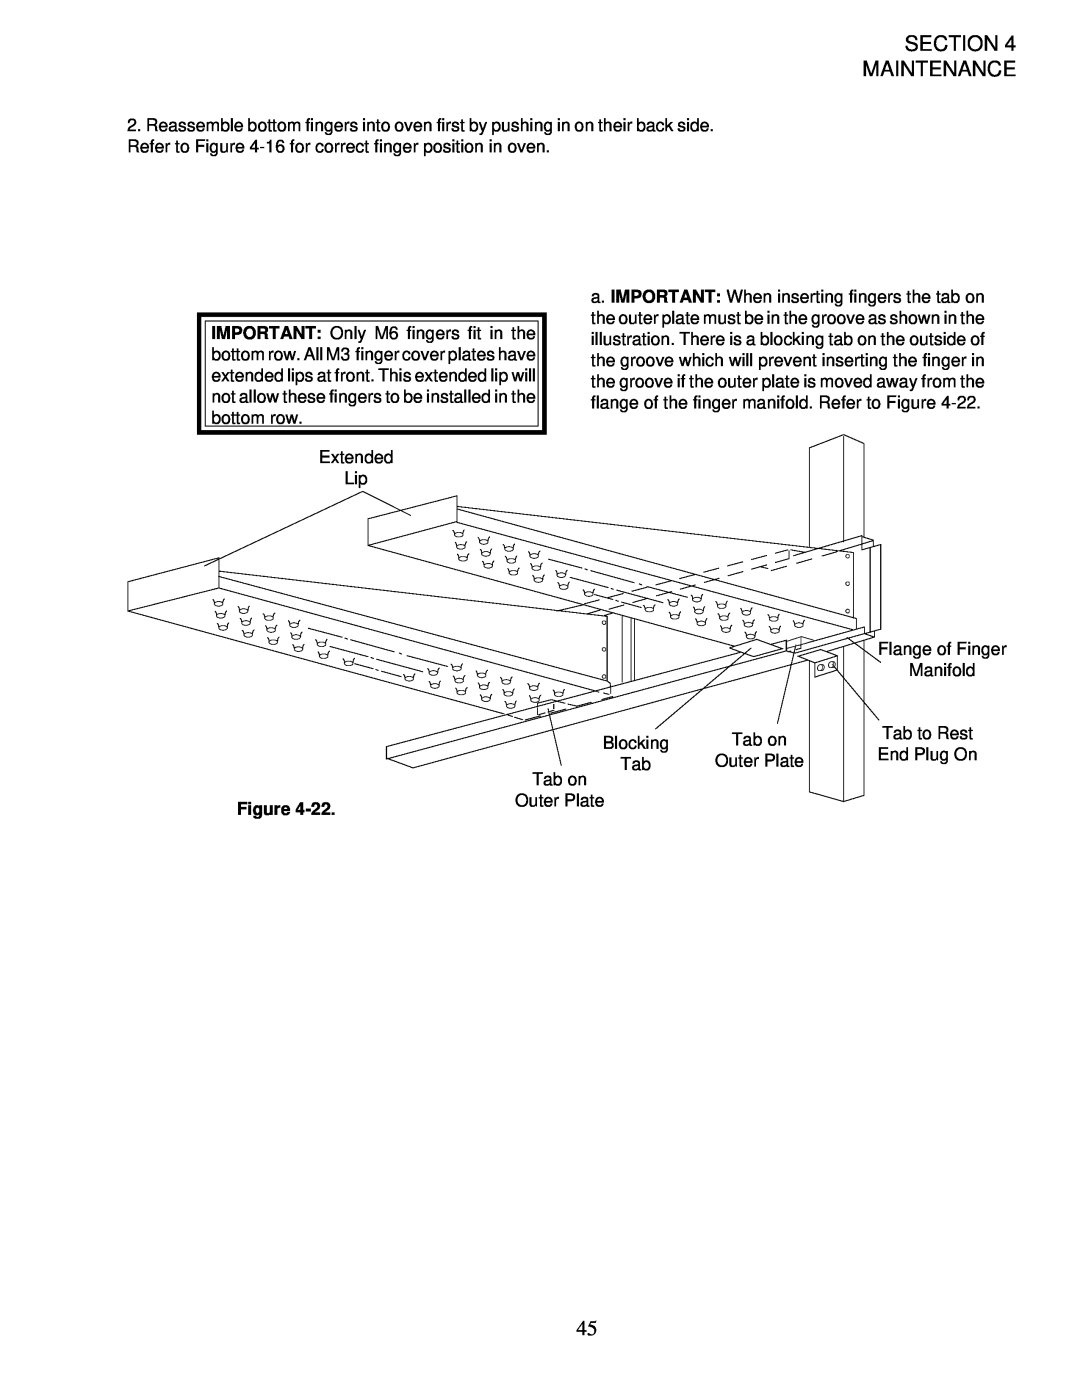 Middleby Marshall PS200-R68 installation manual Section Maintenance, Extended Lip, Figure 